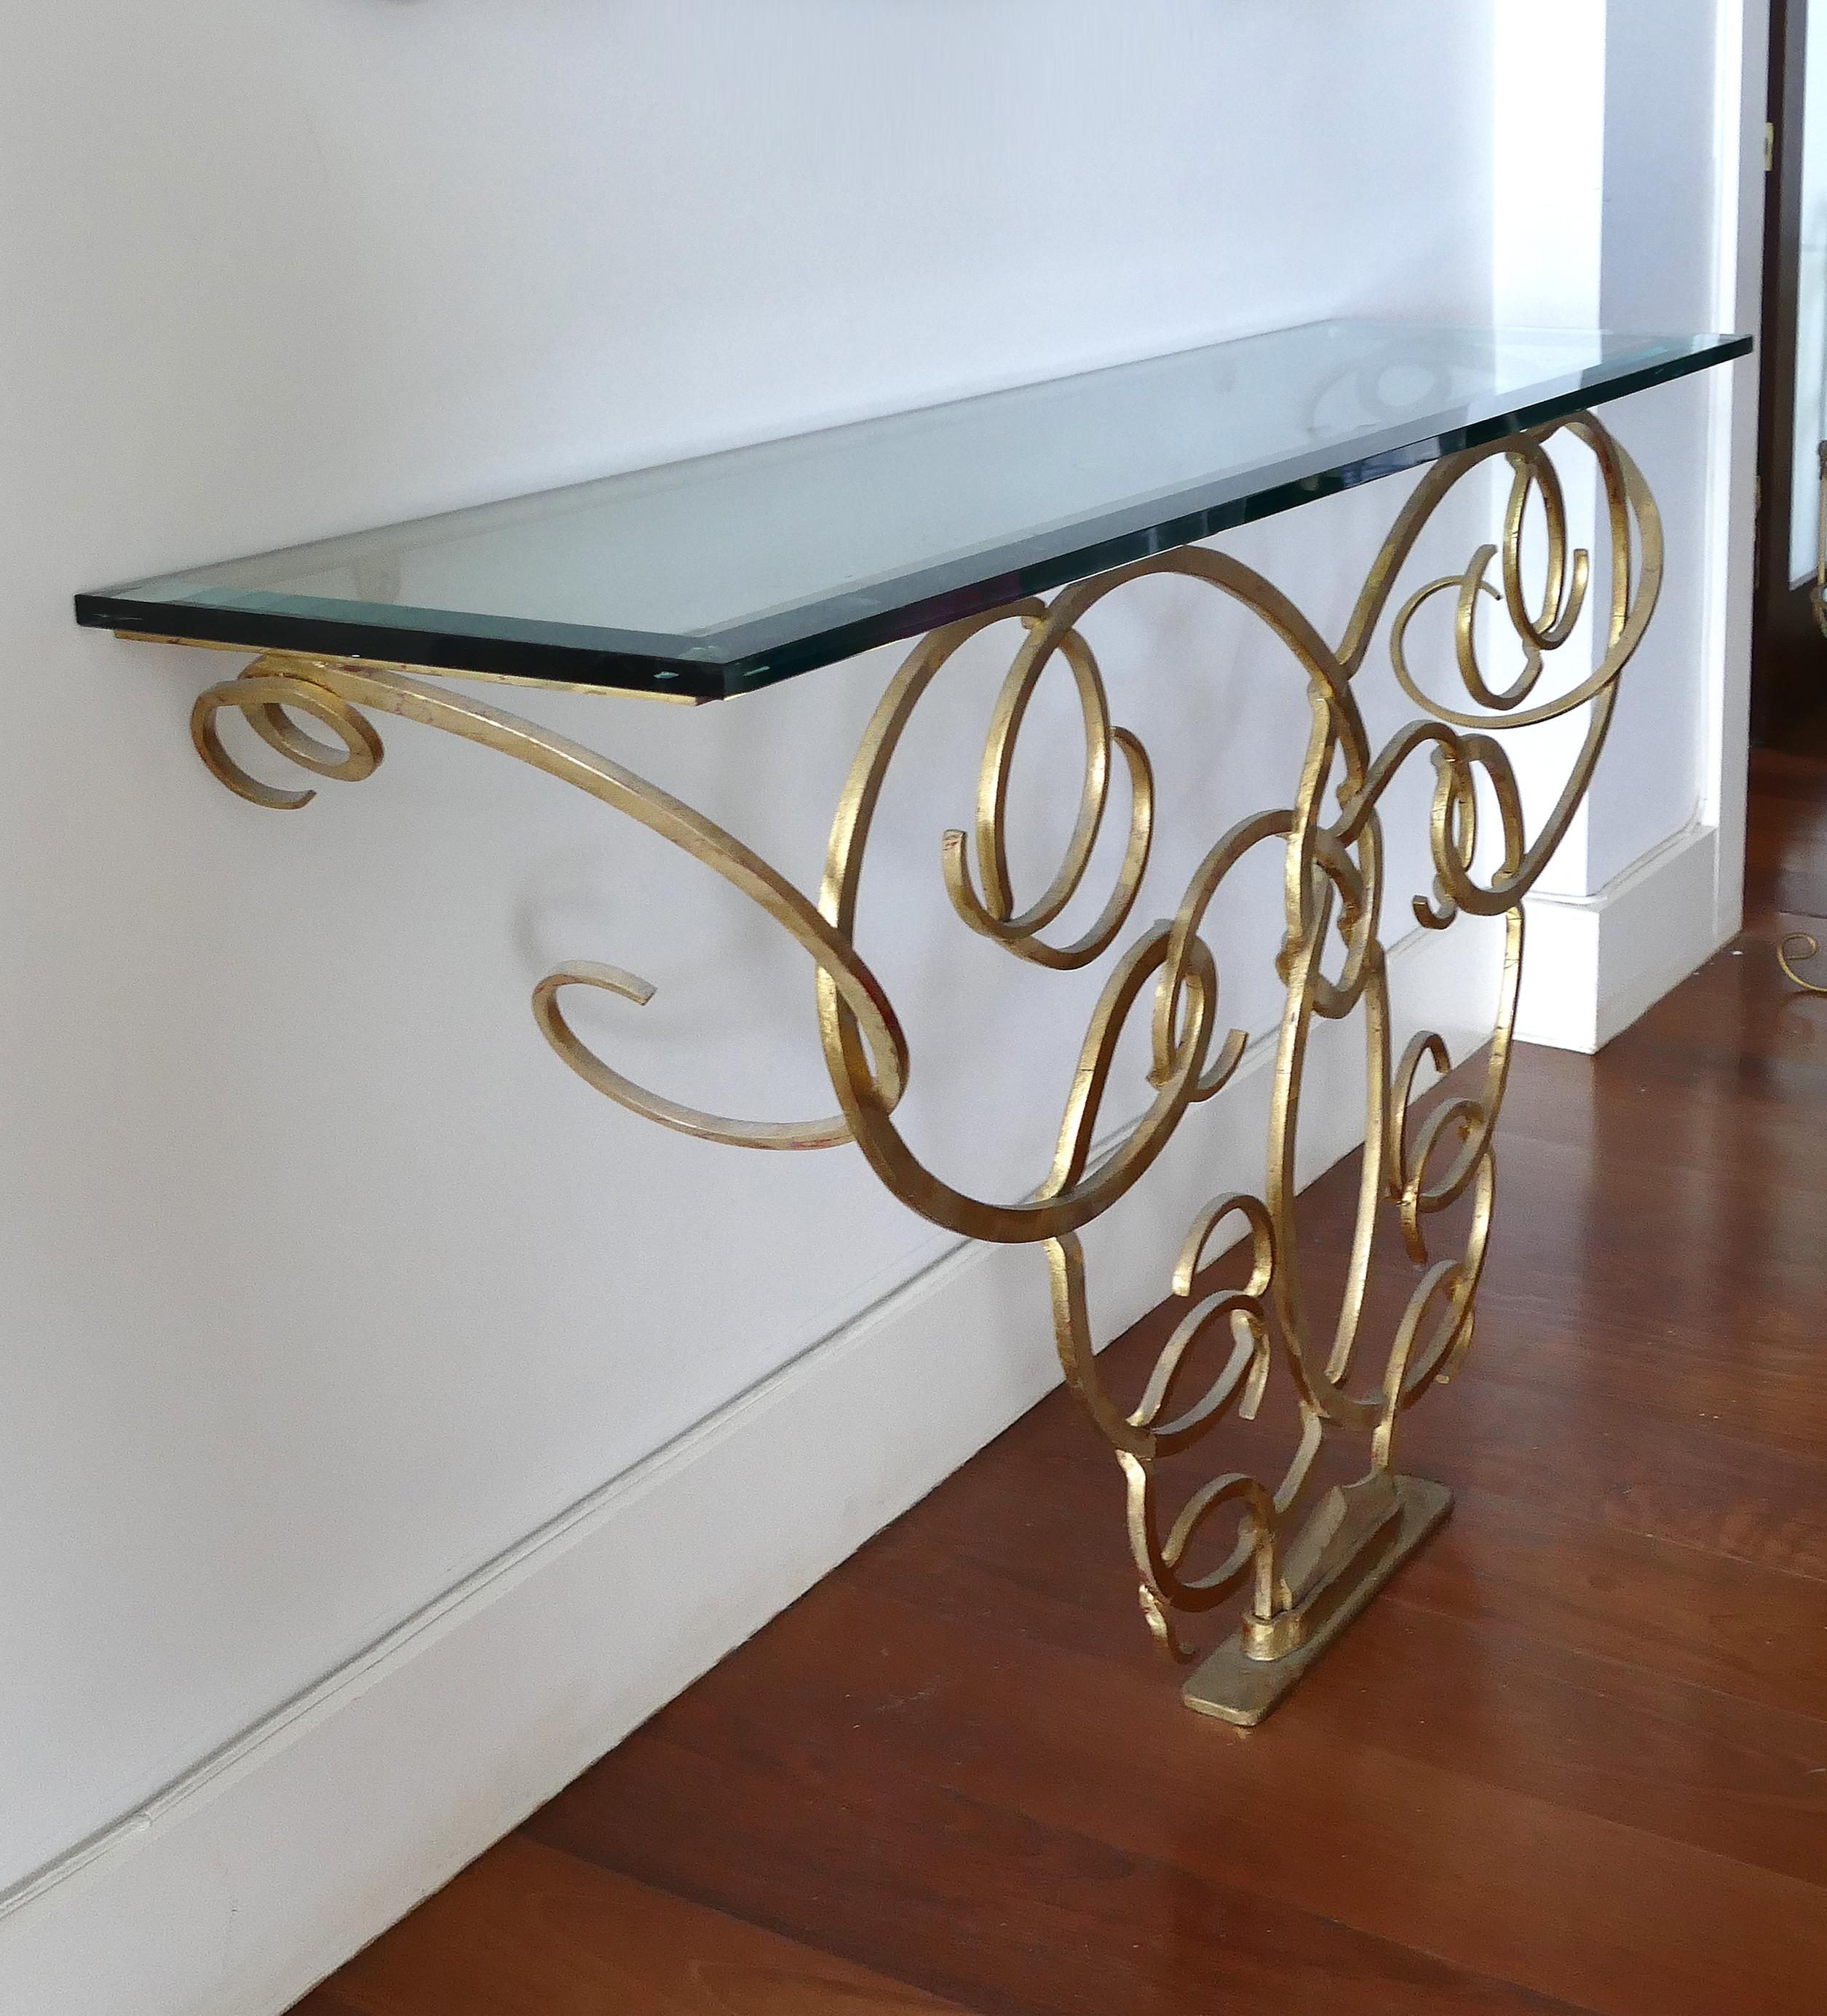 Wrought gilt iron console after Raymond Subes with glass top 

Offered for sale is a handwrought sculptural gilt iron console table with a glass top in the manner of Raymond Subes. The ironwork evokes a sense of lightness with great movement; the